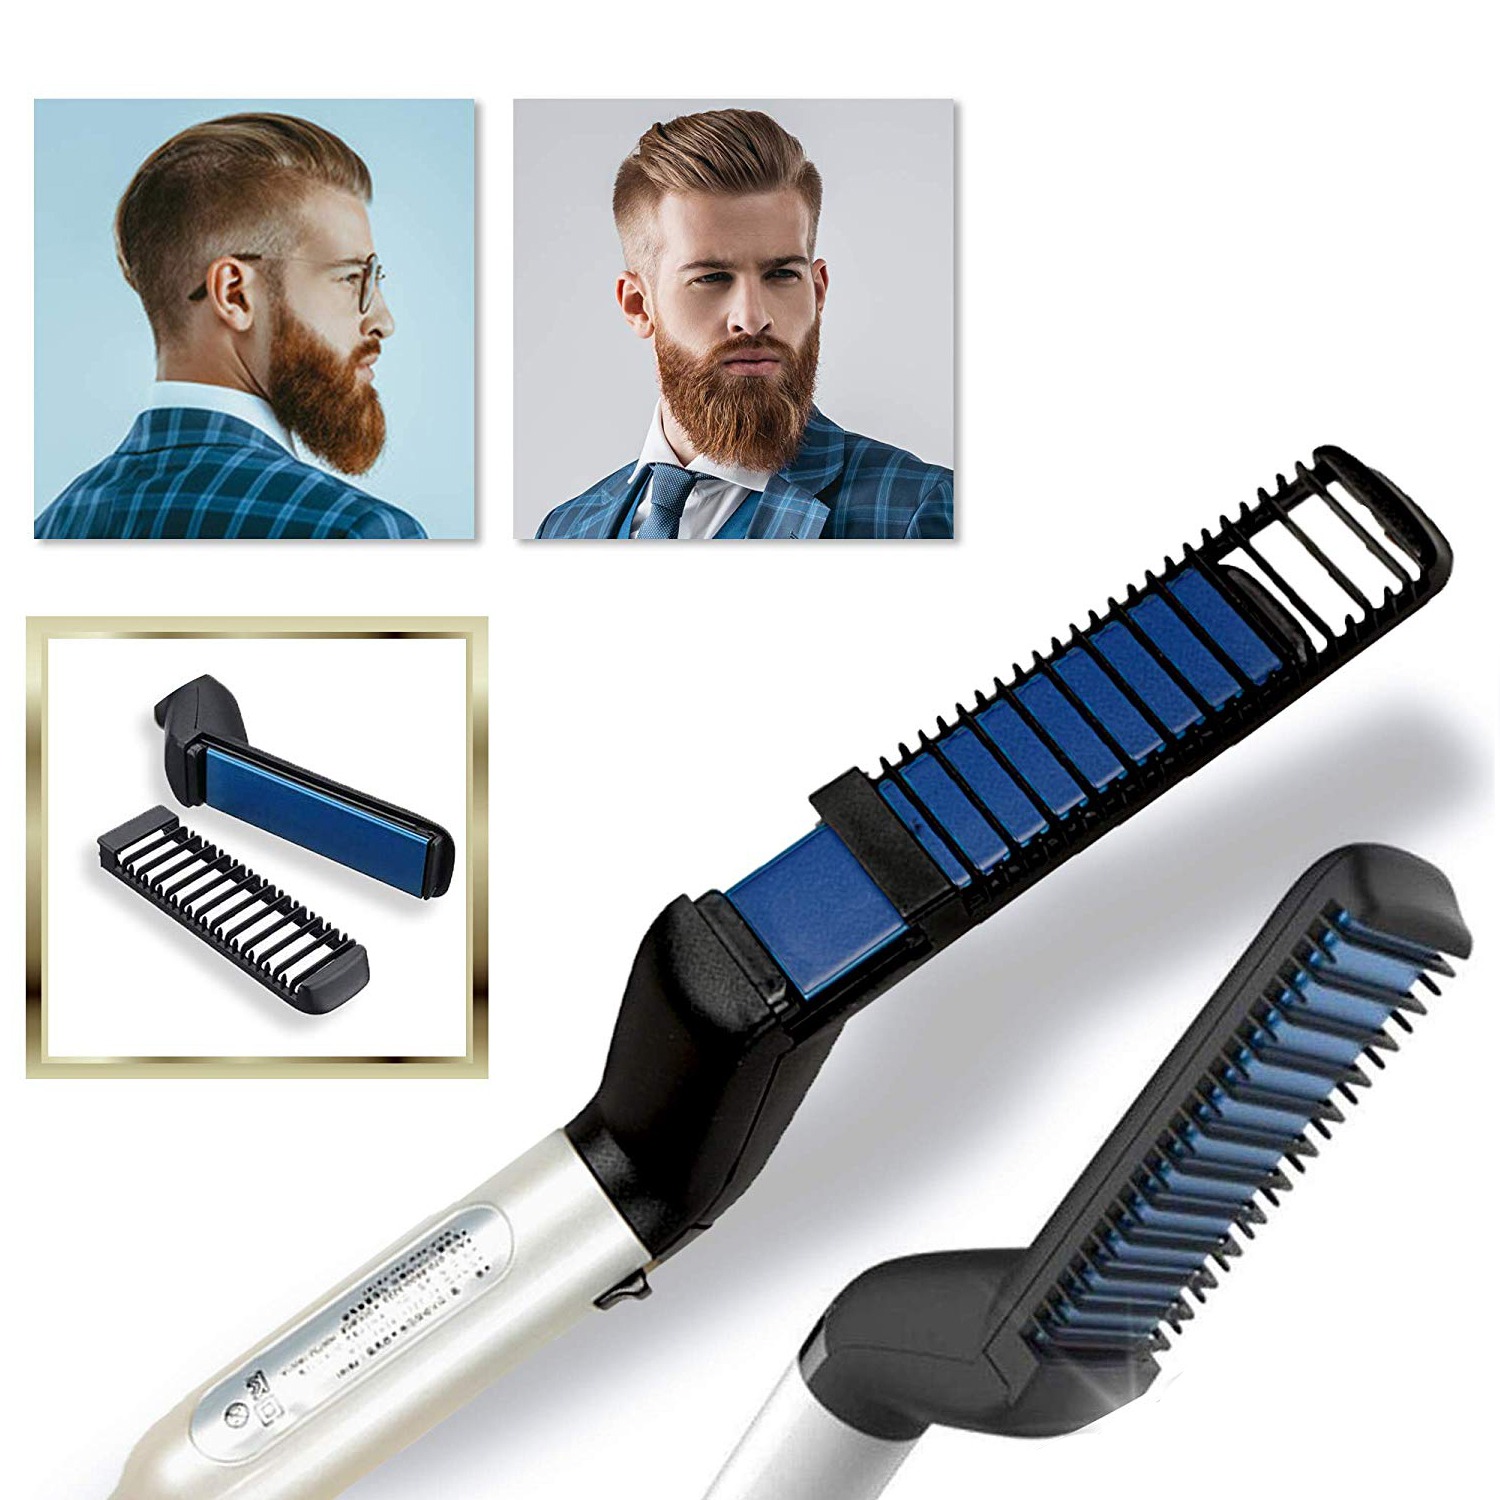 Comb+hair+styling+and+hair+heated+on+electricity